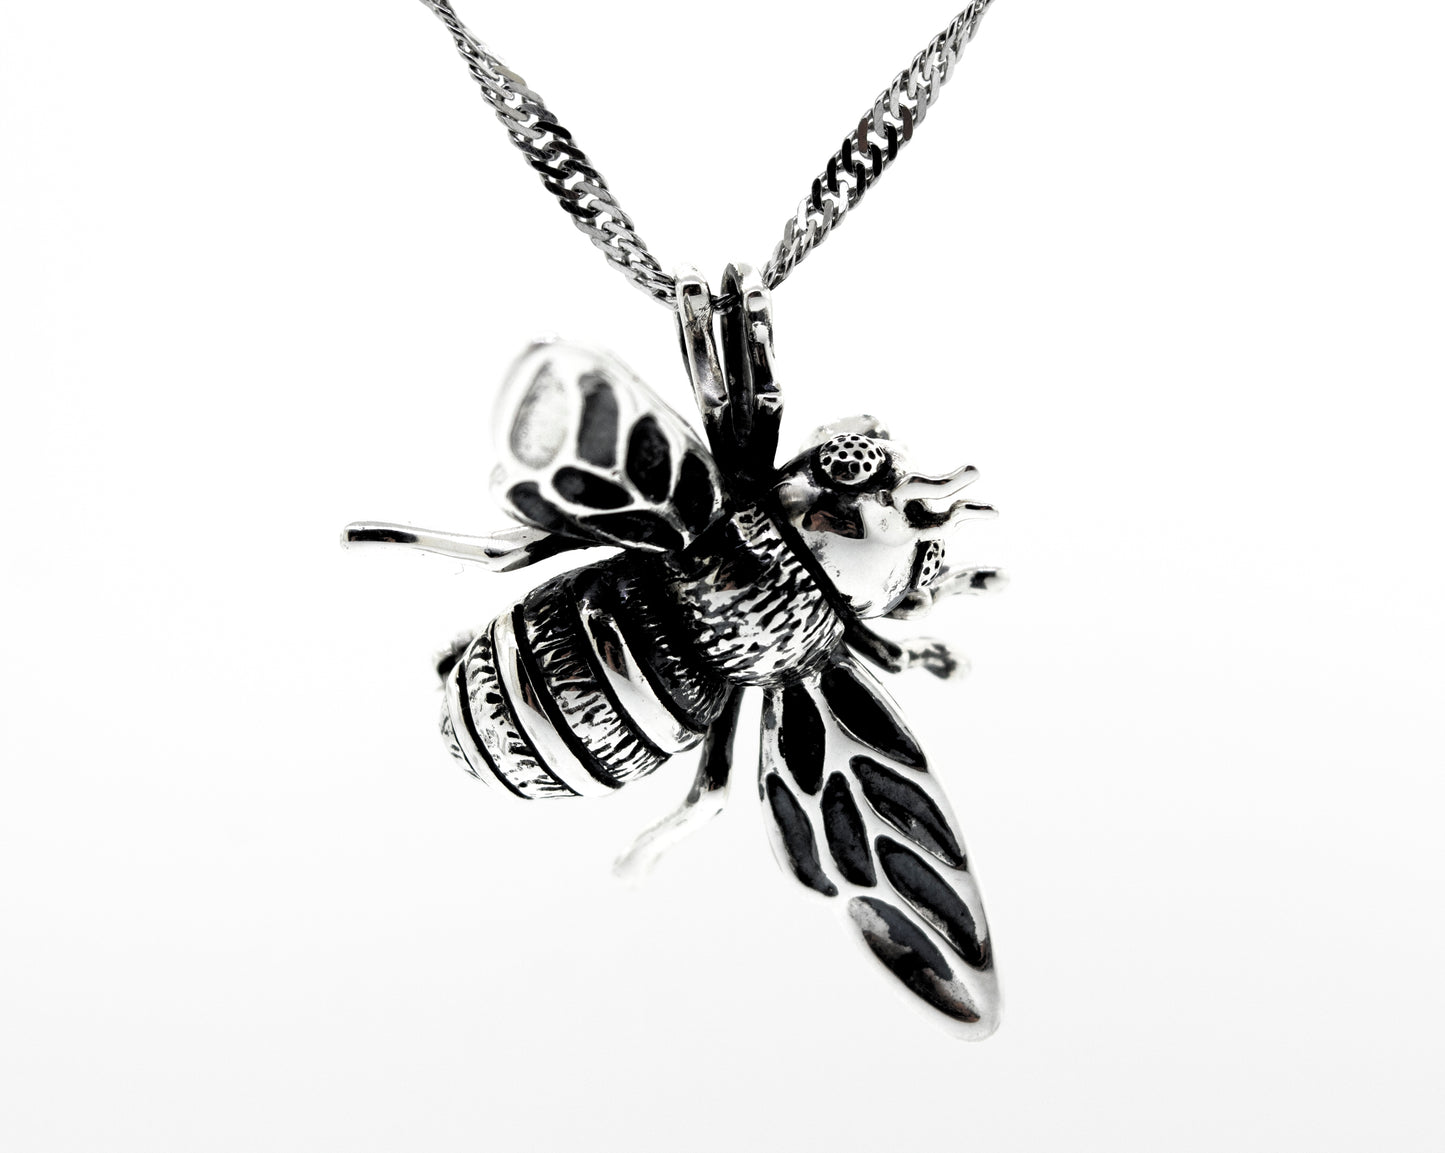 A Super Silver Stunning Sterling Silver Bee Pendant is shown on a white background.